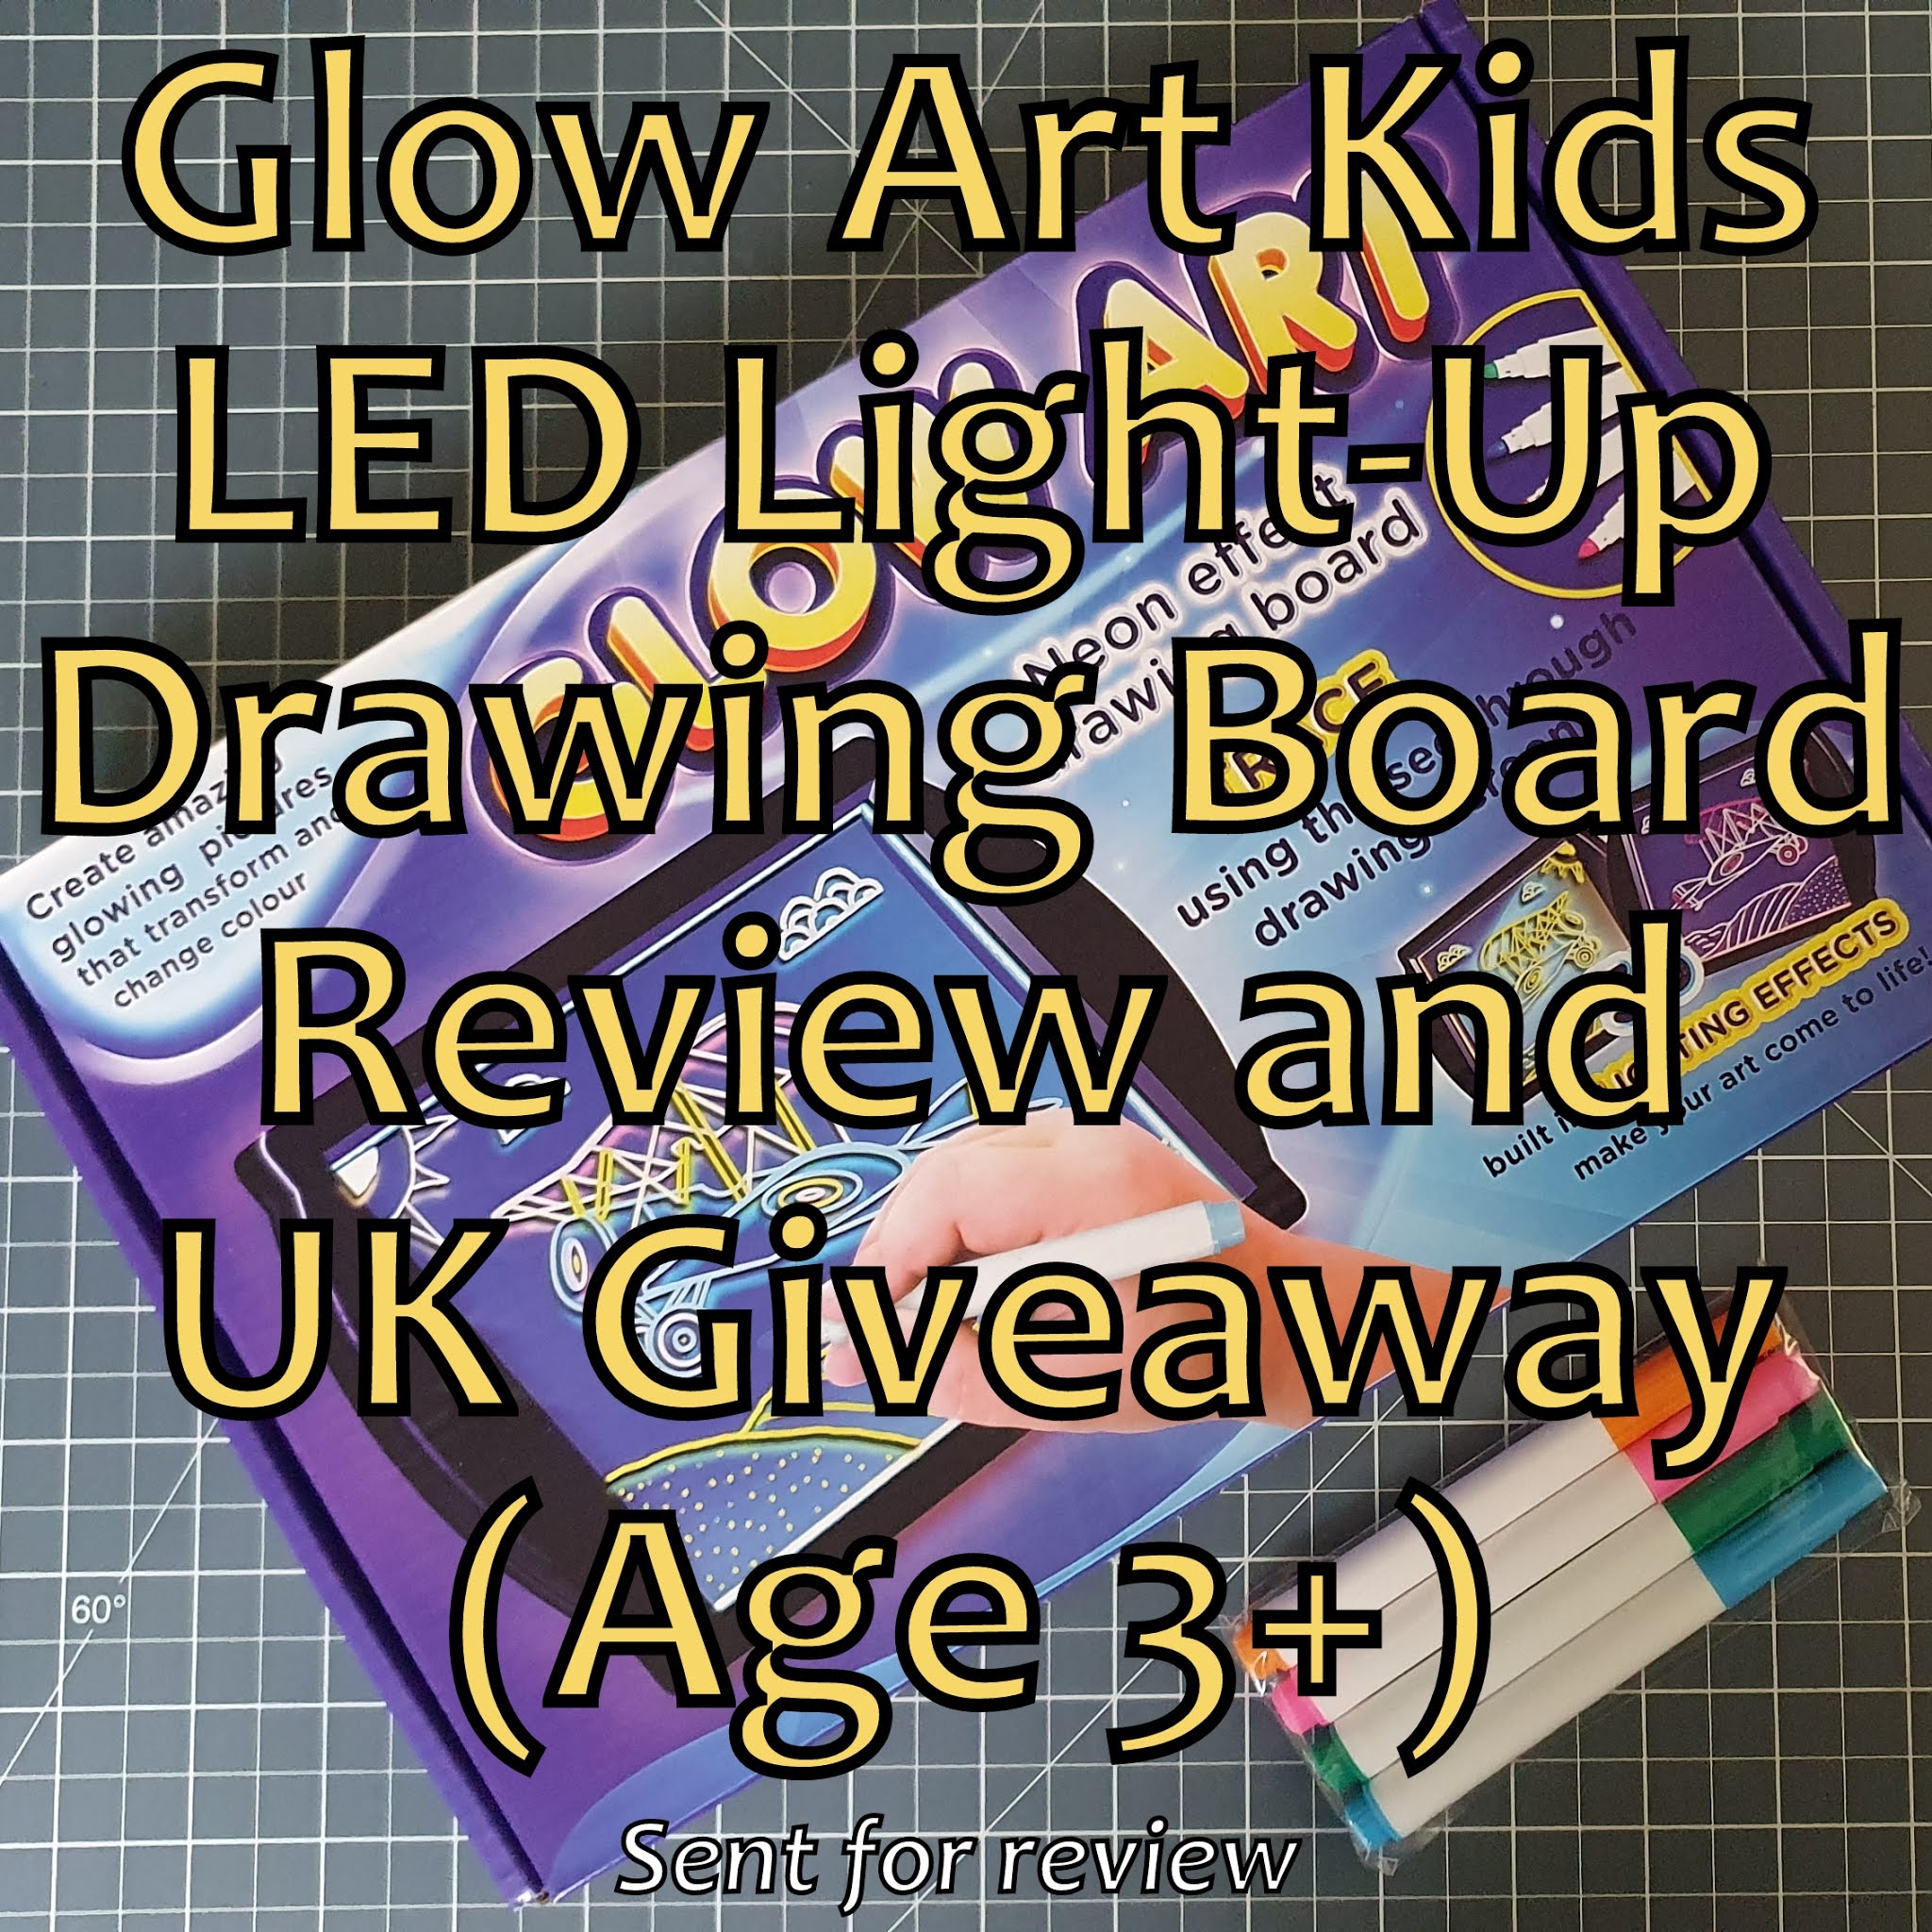 The Brick Castle: Glow Art Drawing Board (age 3+) Review And UK